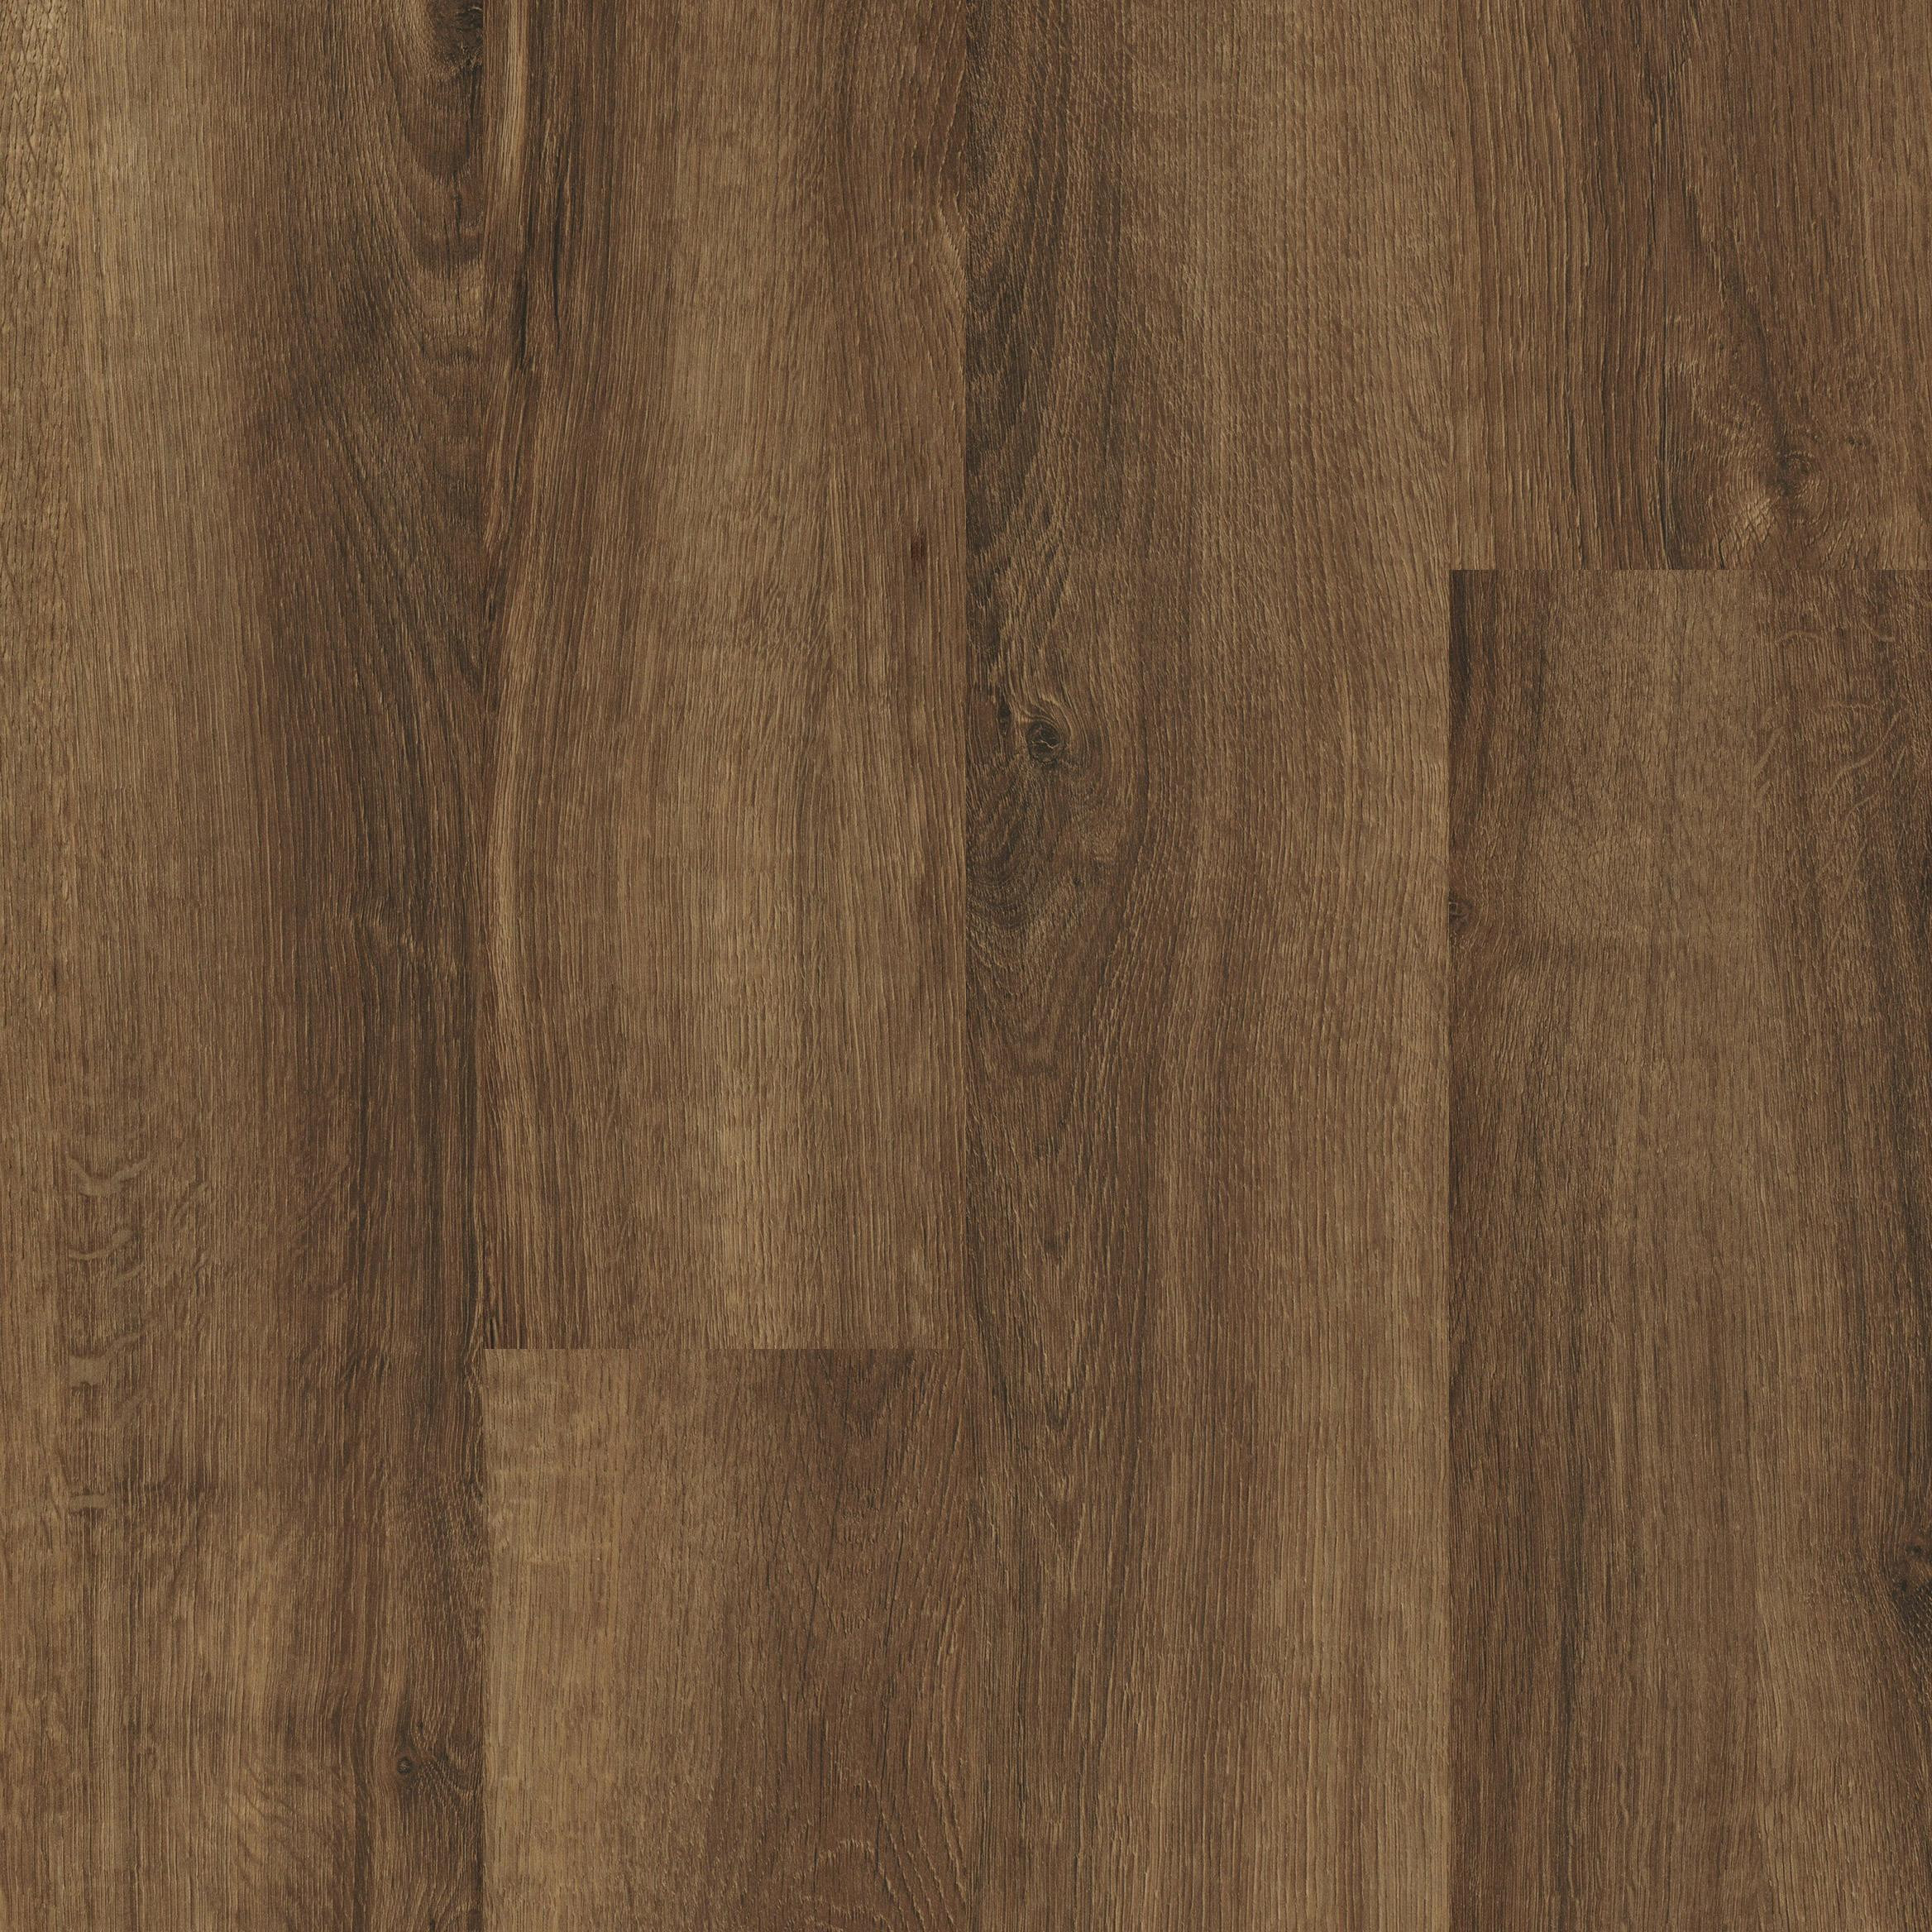 16 Lovely Santos Mahogany Hardwood Flooring Prices 2024 free download santos mahogany hardwood flooring prices of ivc liberty click plank 6 wide spring oak 45 vinyl flooring 60061 within 60061 5 84 x 47 8 approved